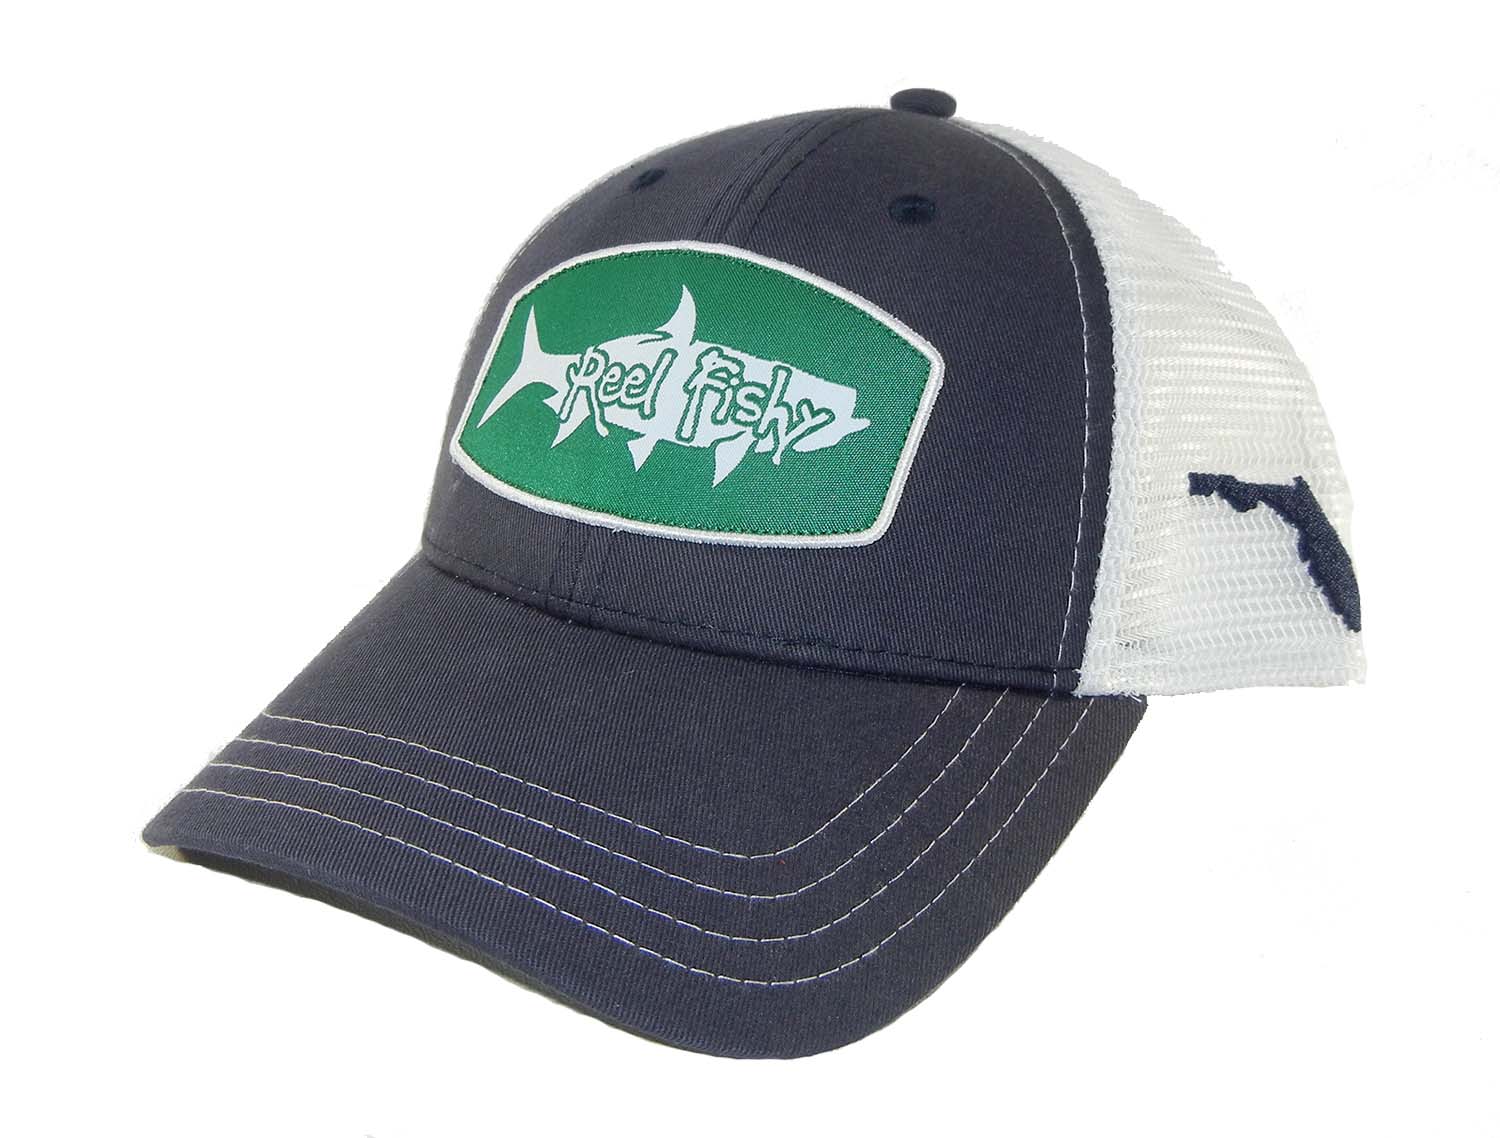 Tarpon Fishing Patch Trucker Hats with State of Florida Logo -*5 Colors! Black W/Aqua Patch